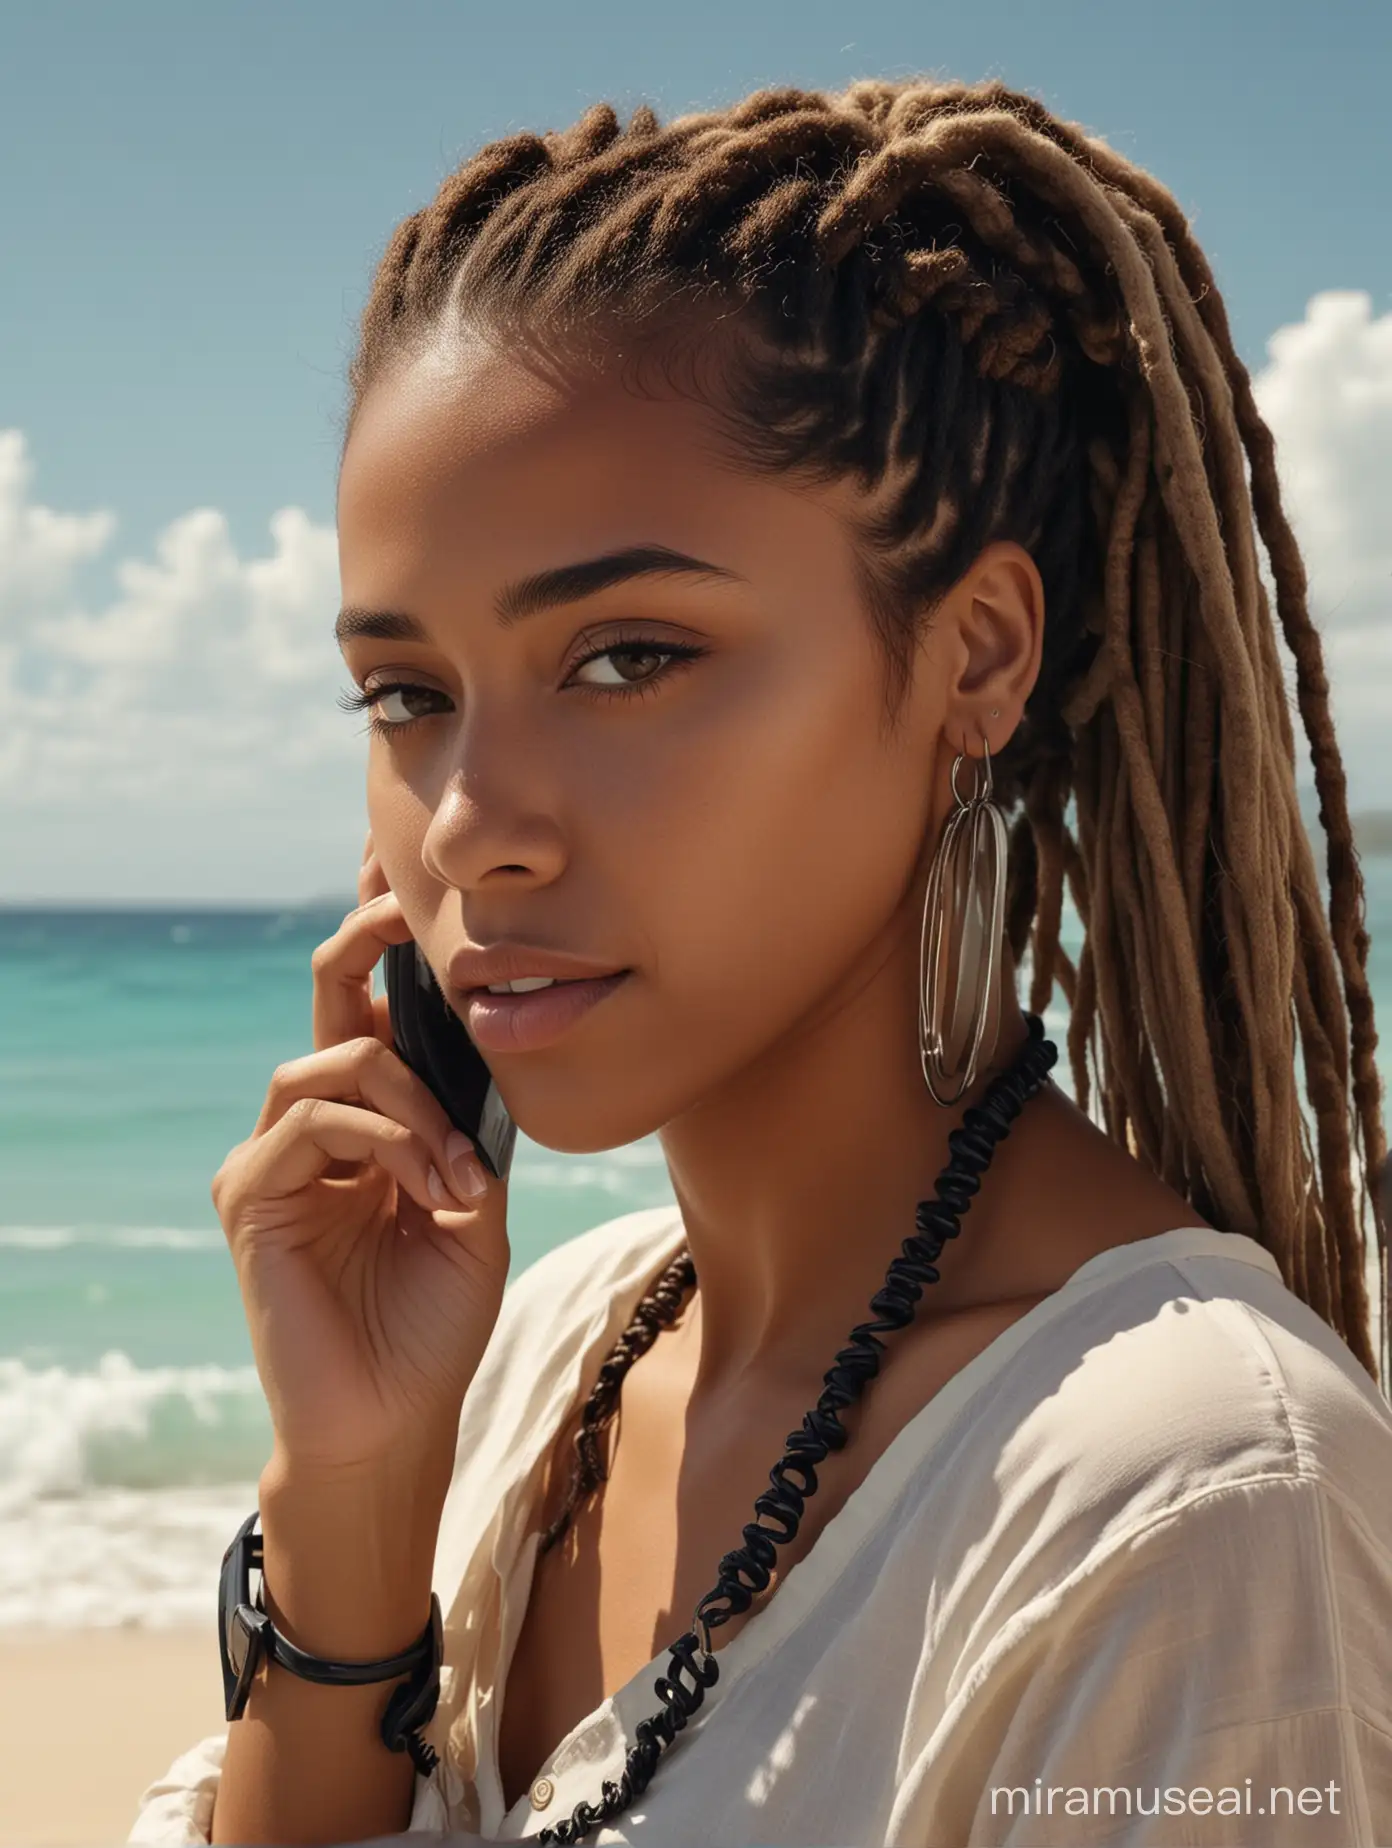 Stylish Caribbean Woman with Ponytail Dreadlocks by the Shoreline